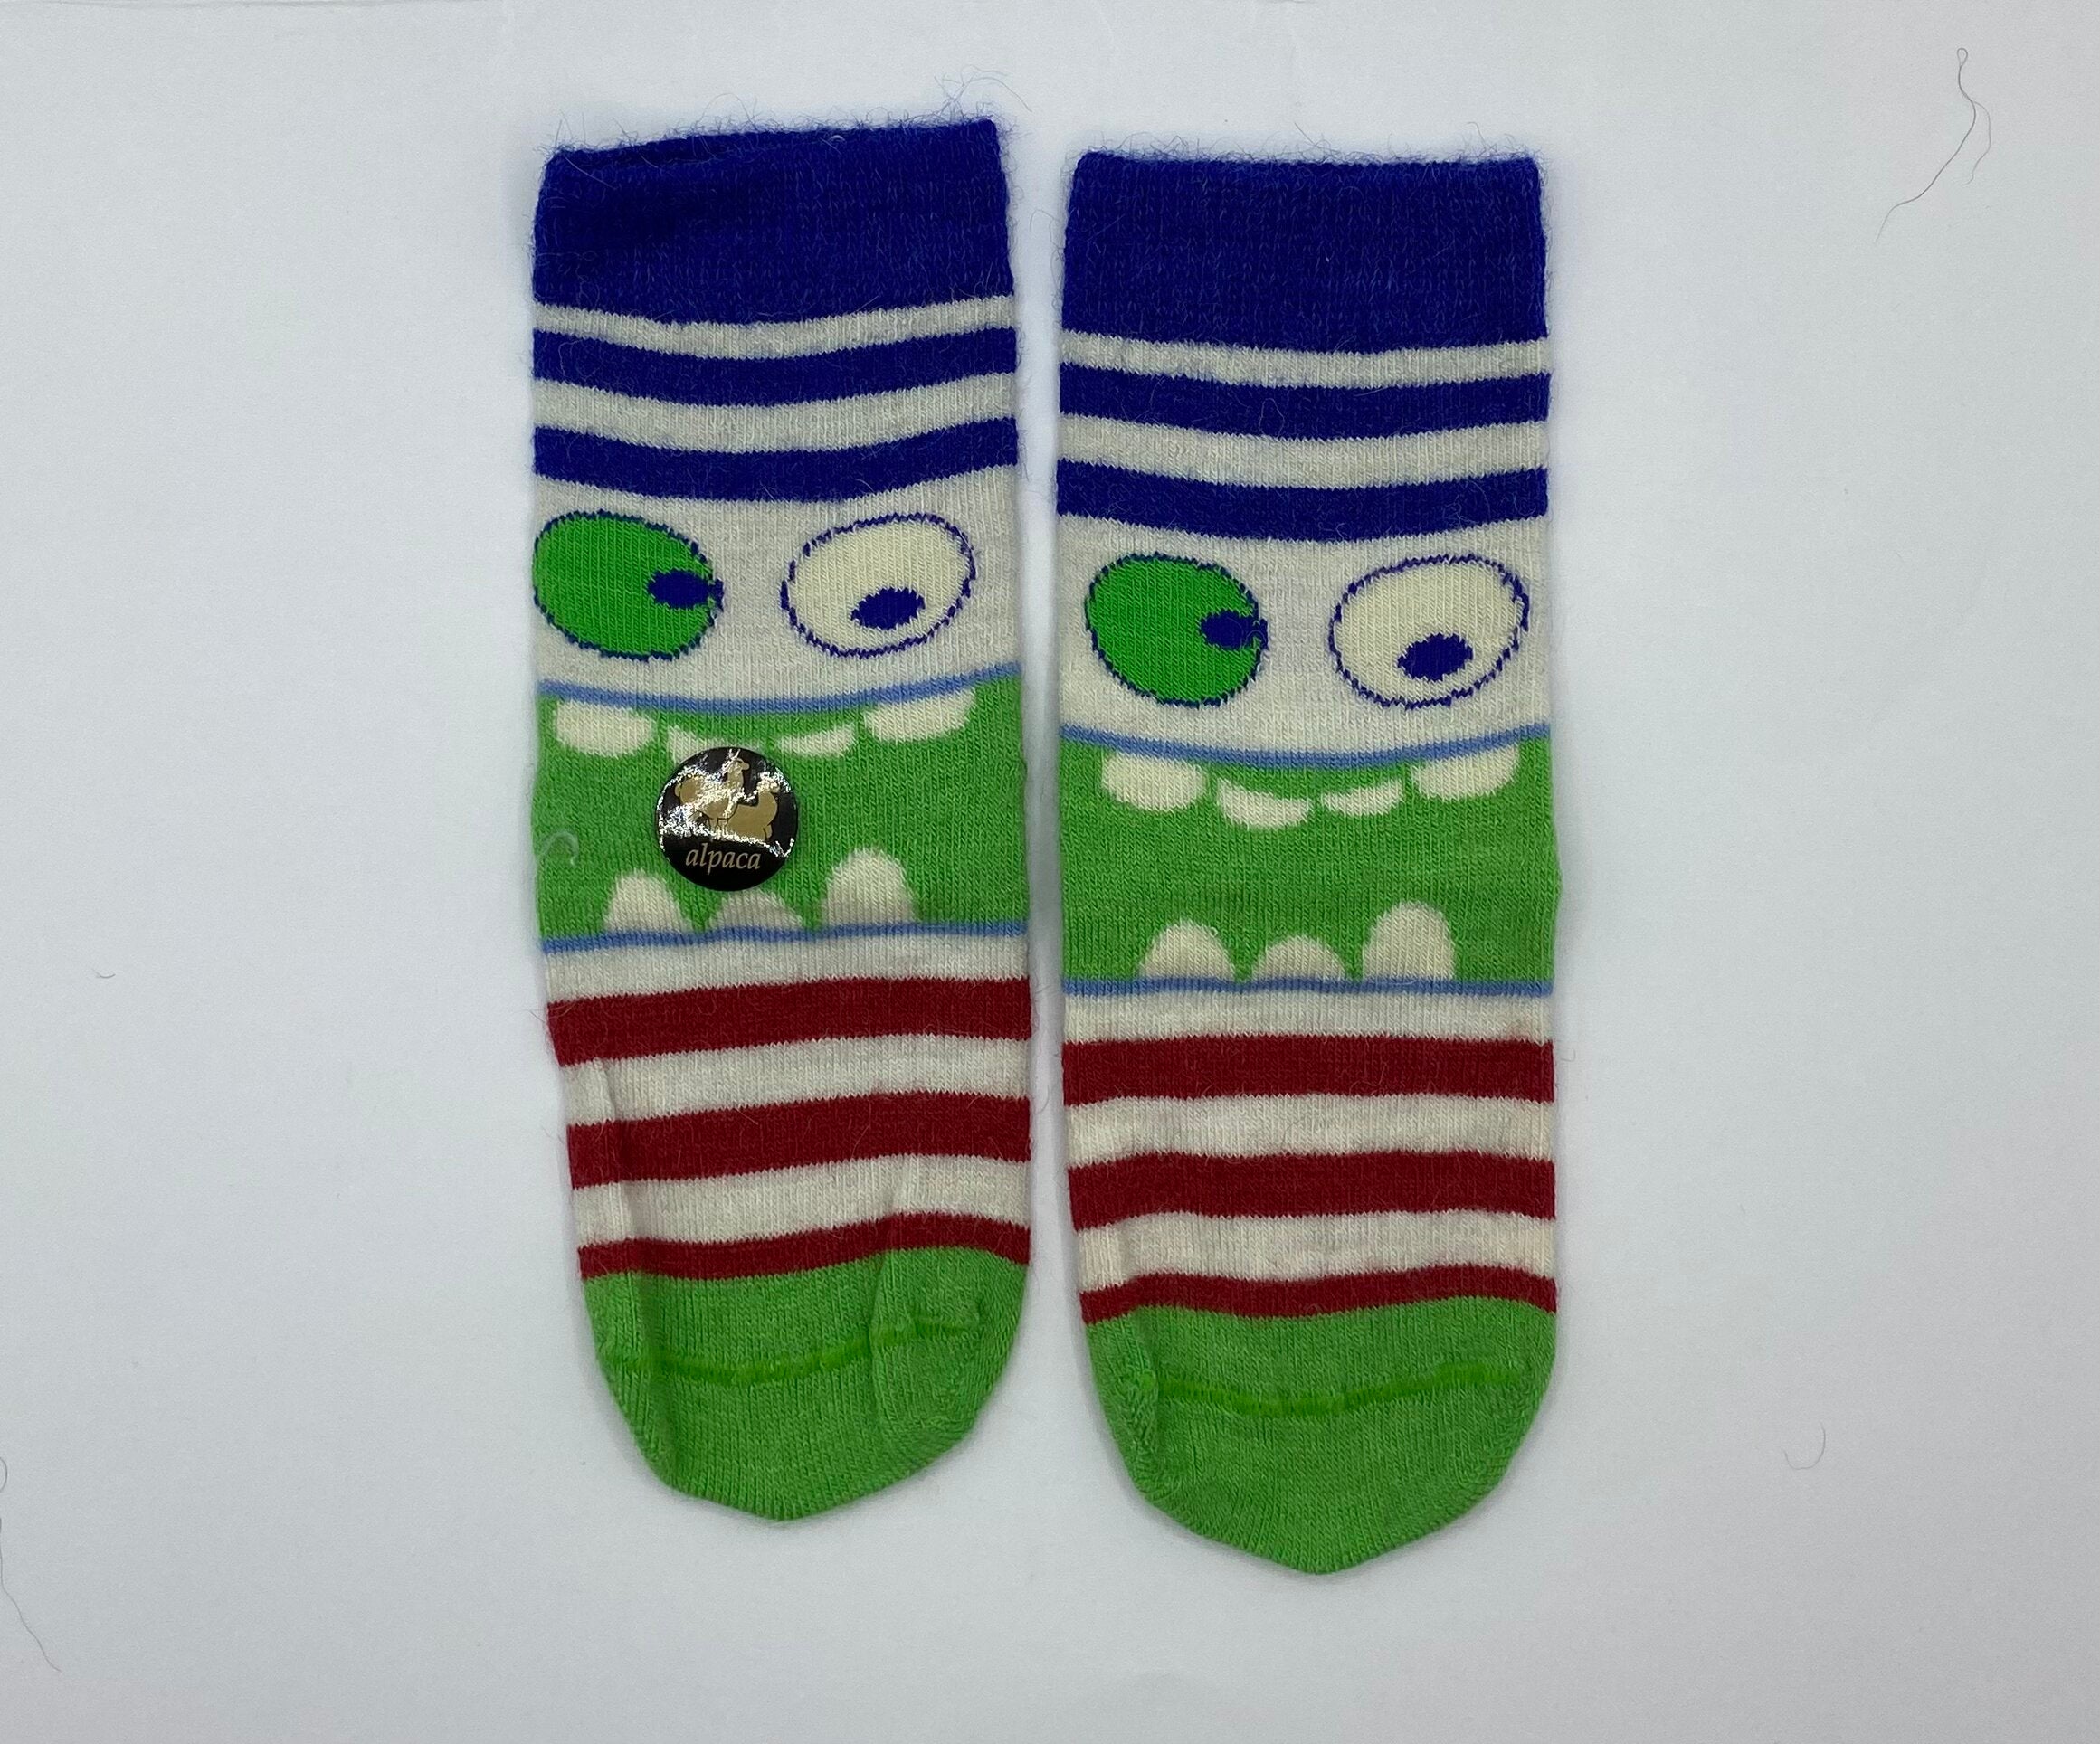 "Discover the Magic of Alpaca Socks for Kids - Naturally Thermal and Monstrously Fun!